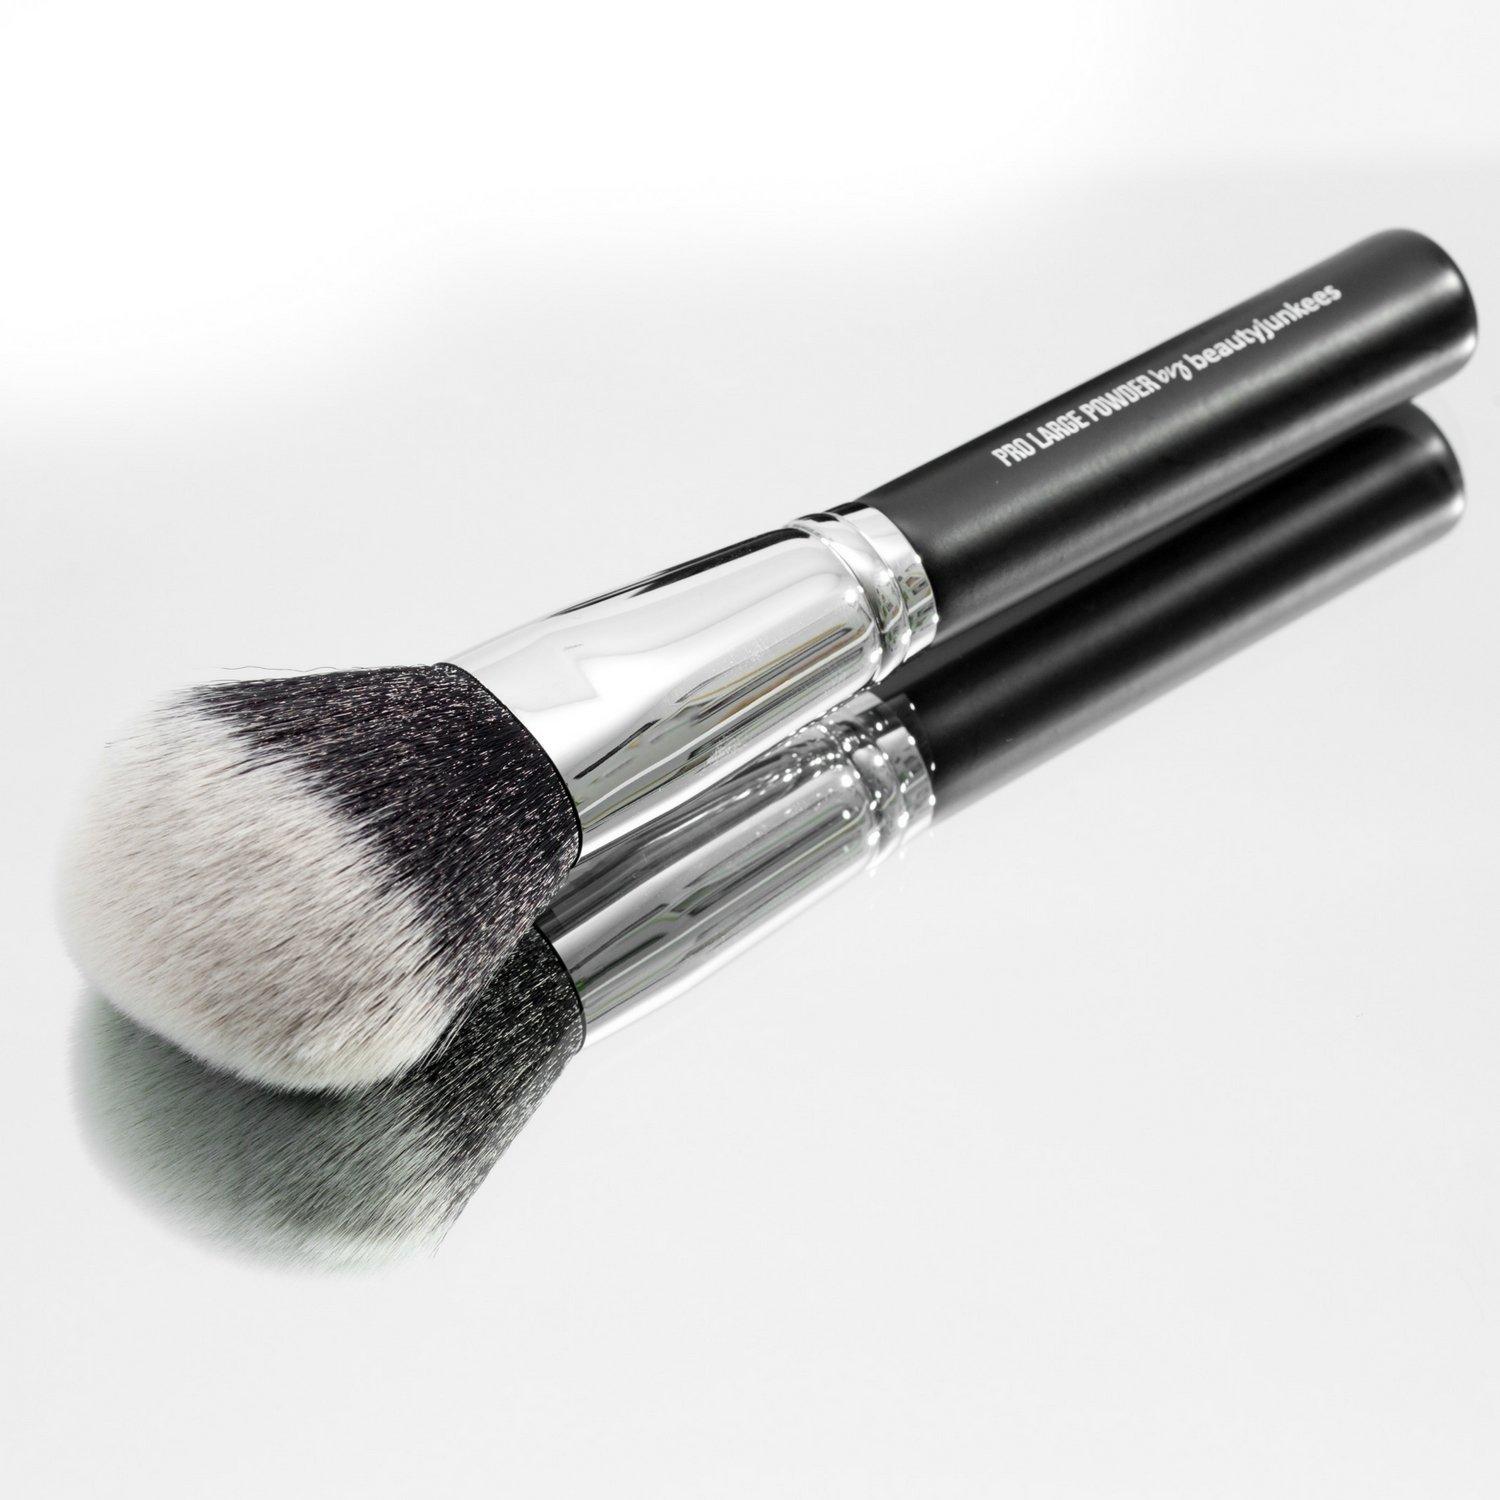 Cosmetics Jumbo Dome Powder Brush, Mineral Powder Makeup Brush for Large  Coverage, Soft Bristle Blending Brush for Makeup, Contours and Defines,  Vegan and Sensitive Skin Friendly